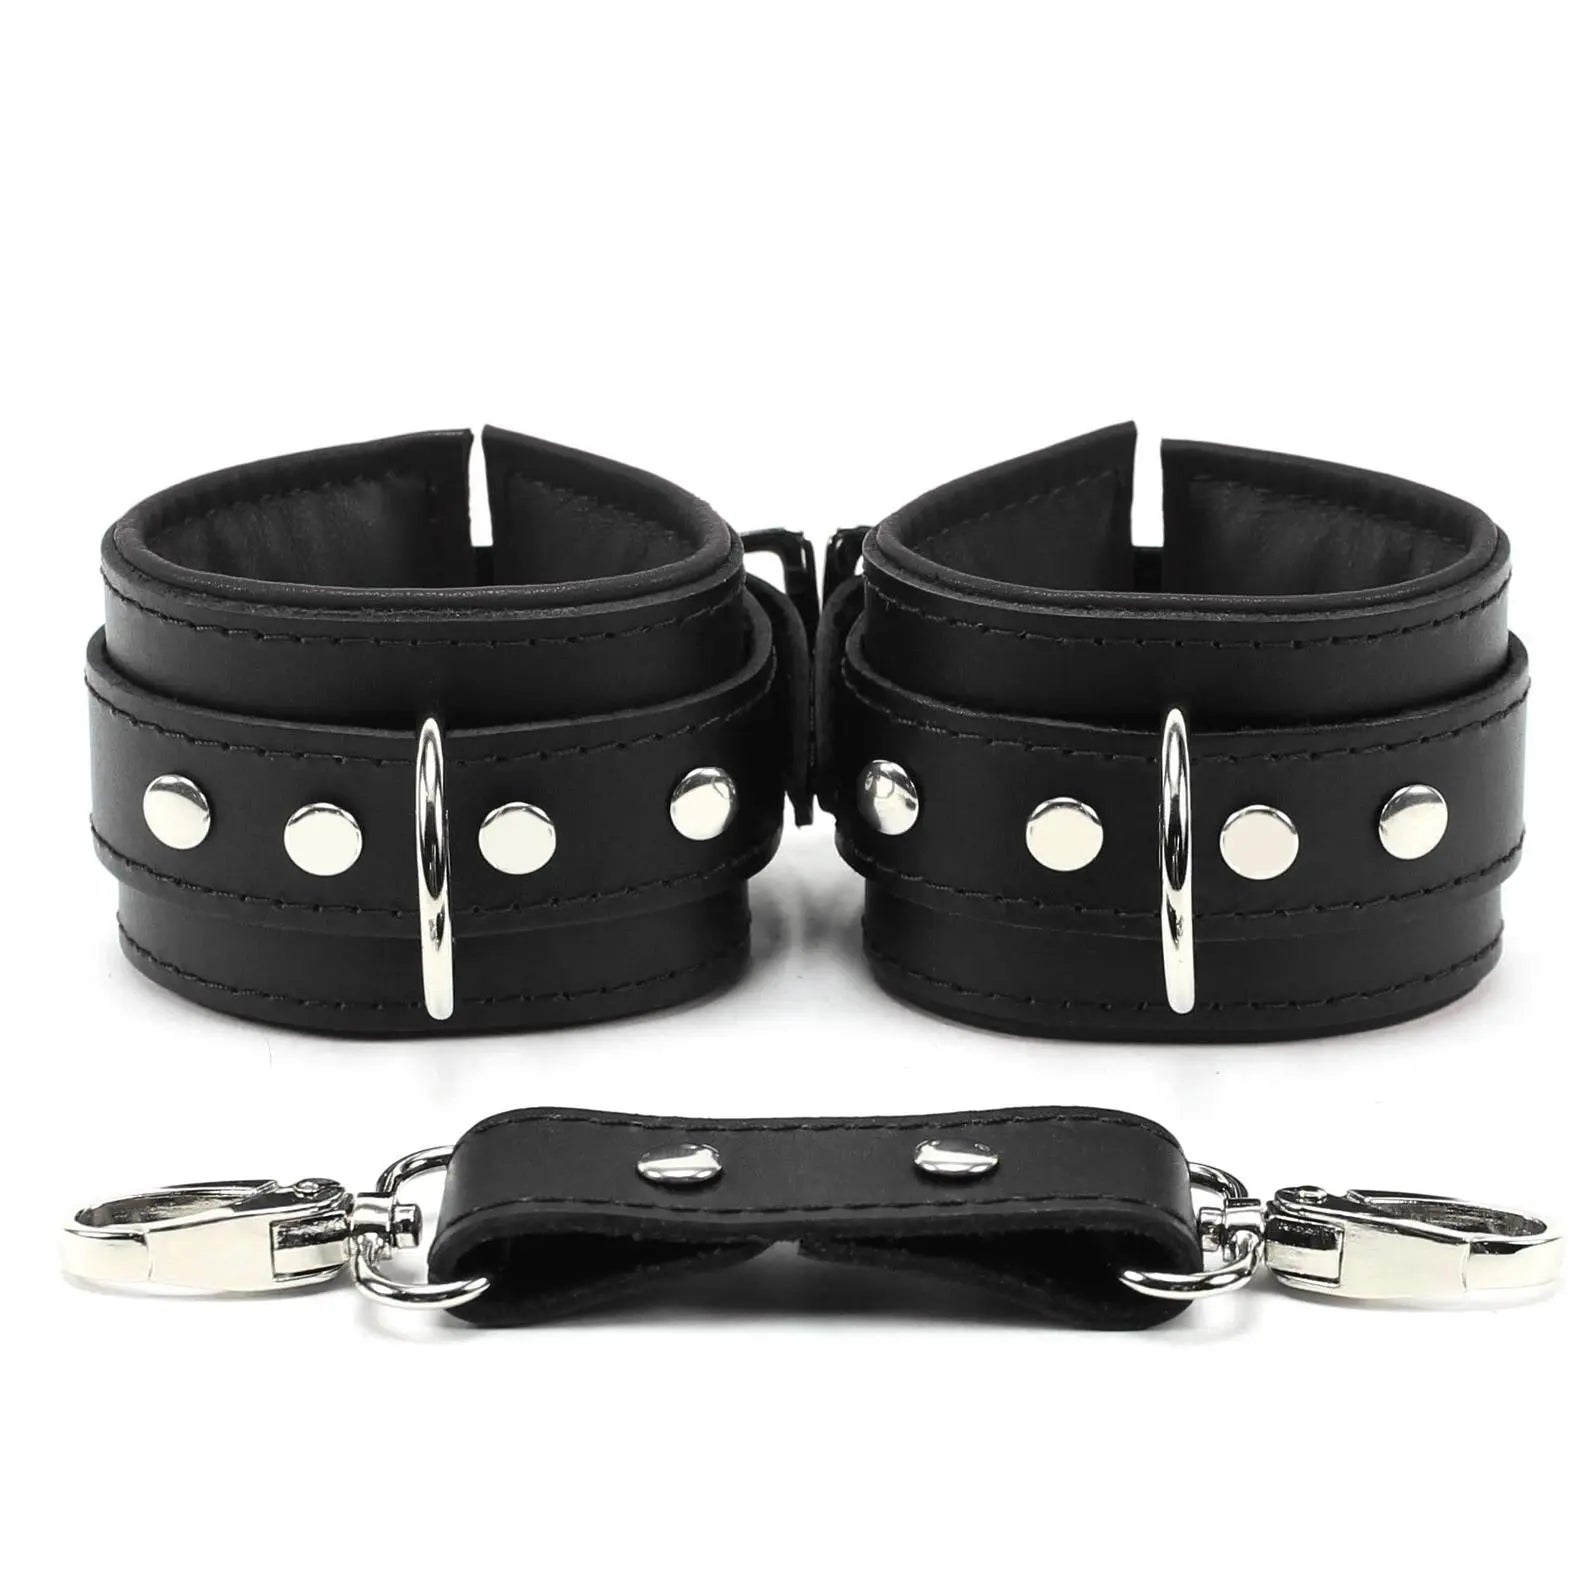 Mandrake Leather Cuff Restraints with & without Locks Oddo Leather